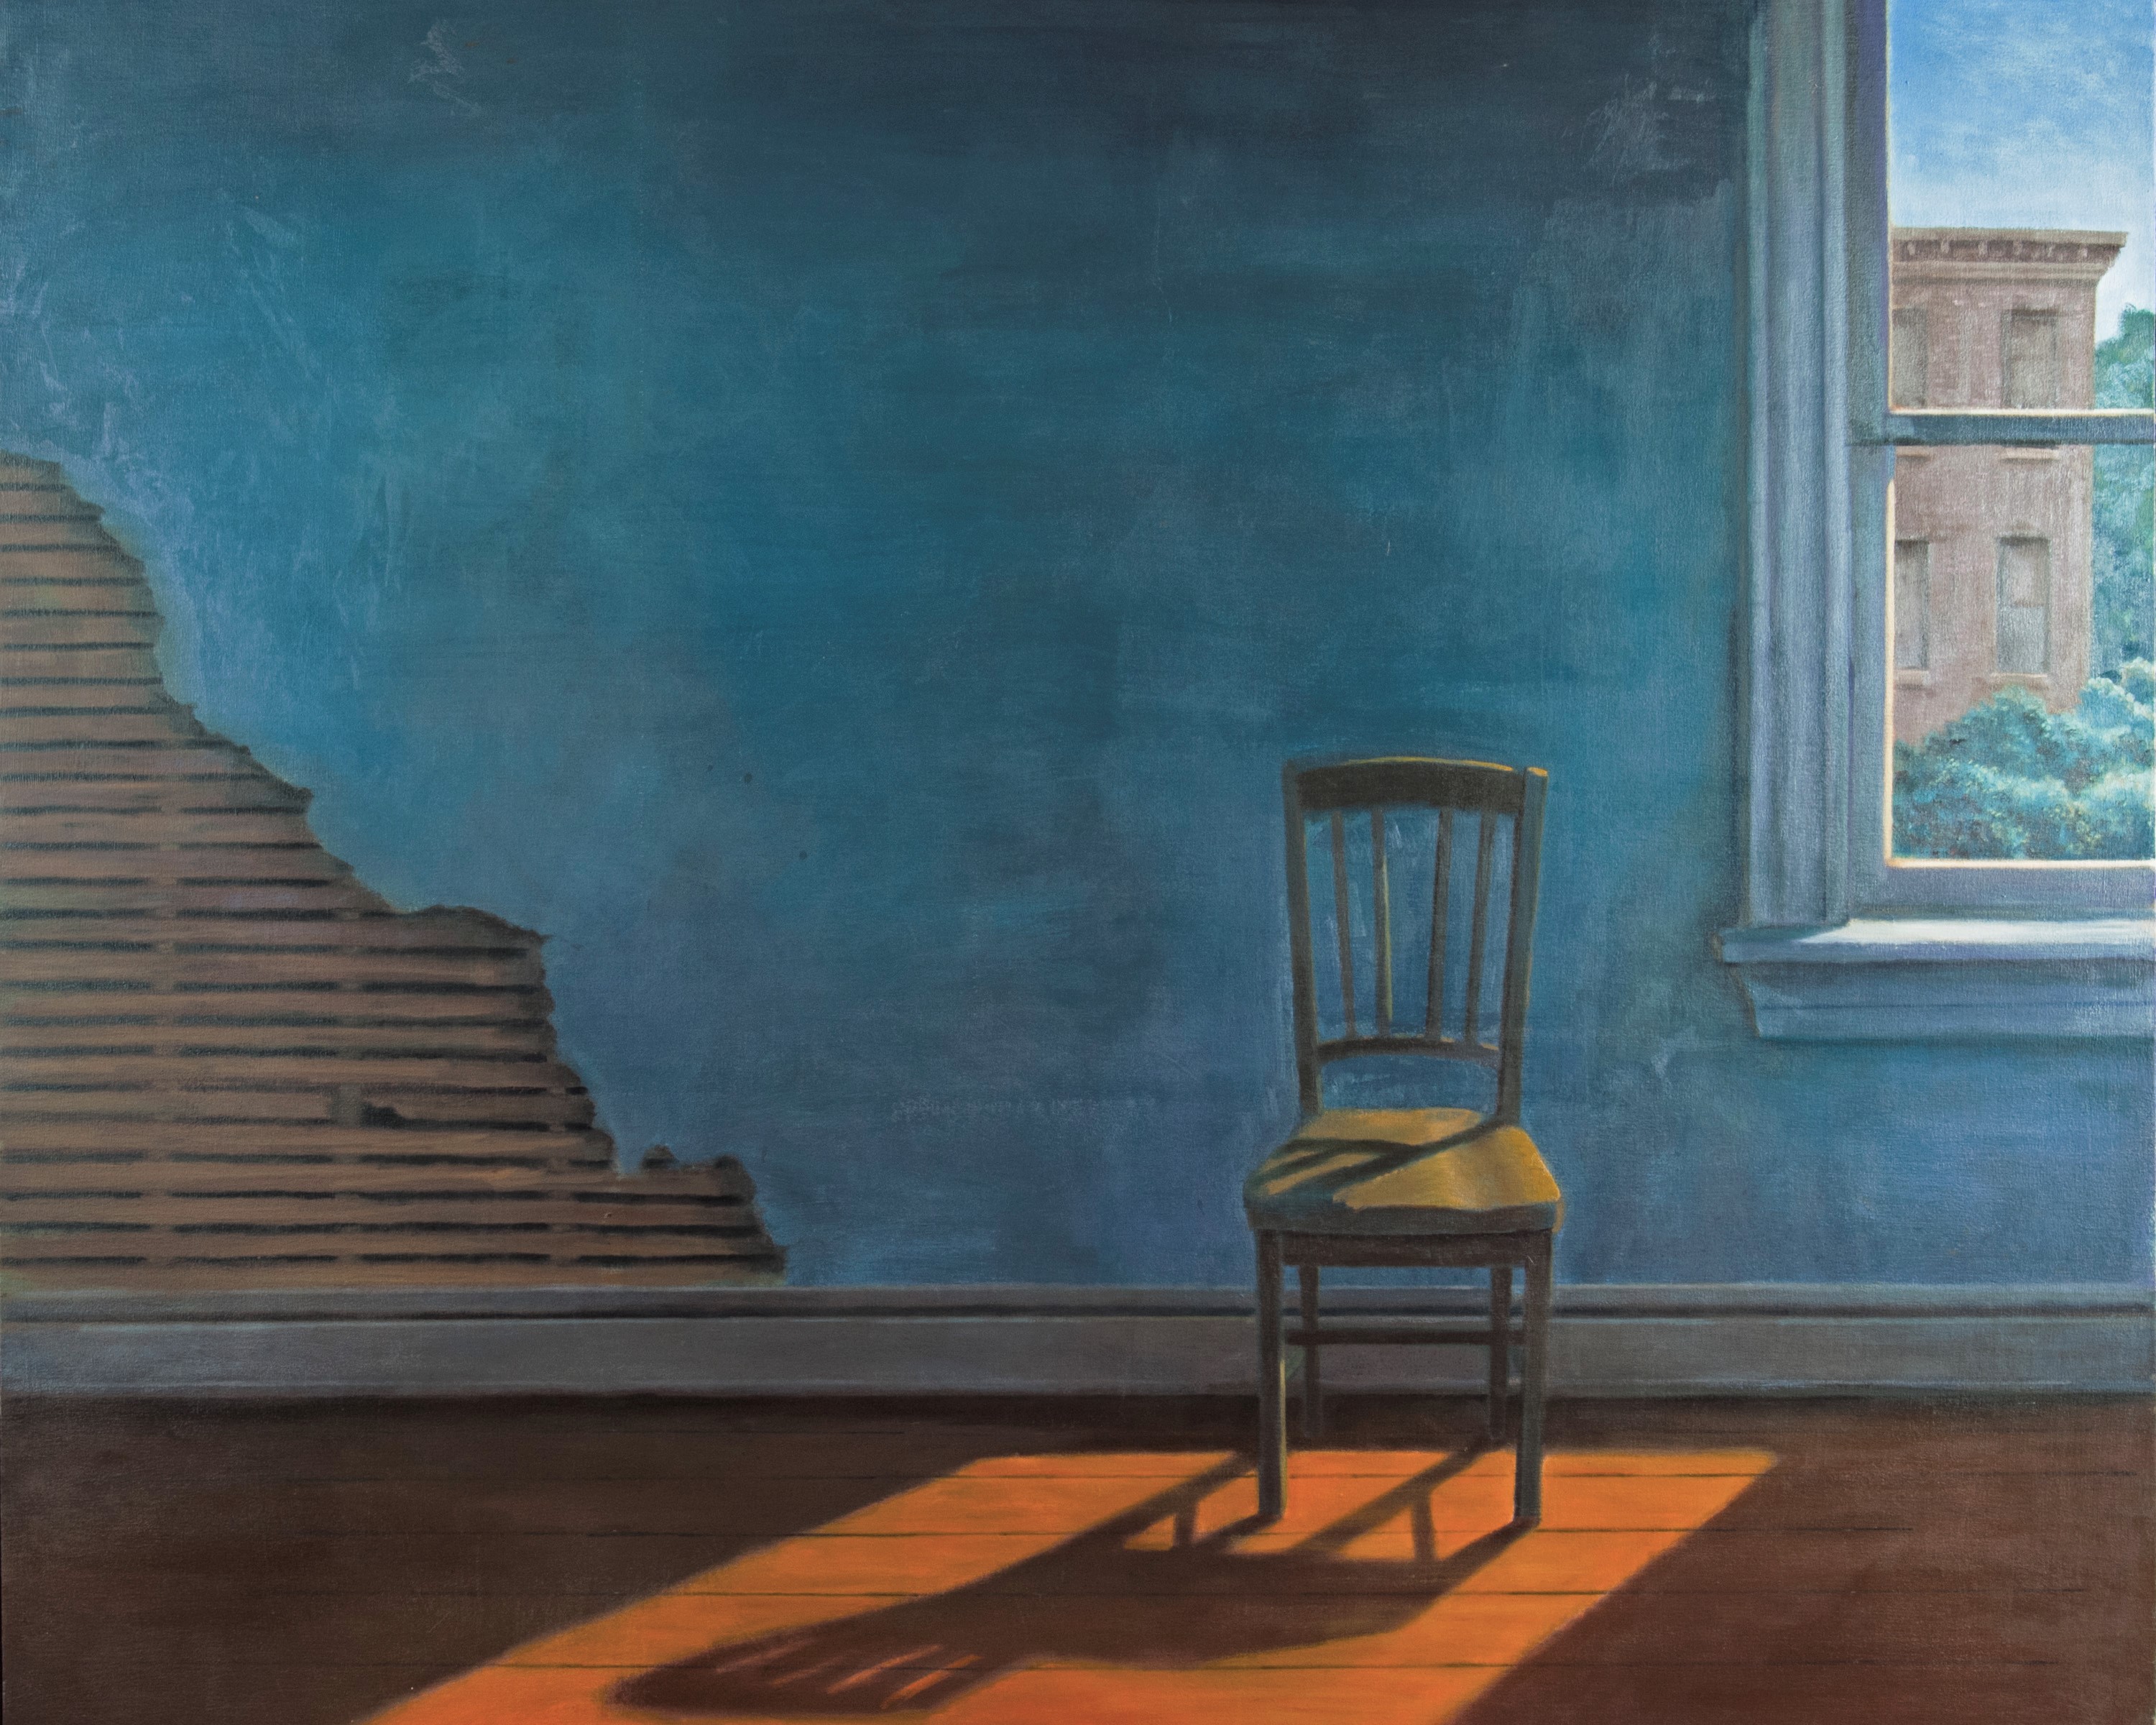 Christopher Brennan  'Sun On An Empty Chair', created in 2006, Original Painting Oil.